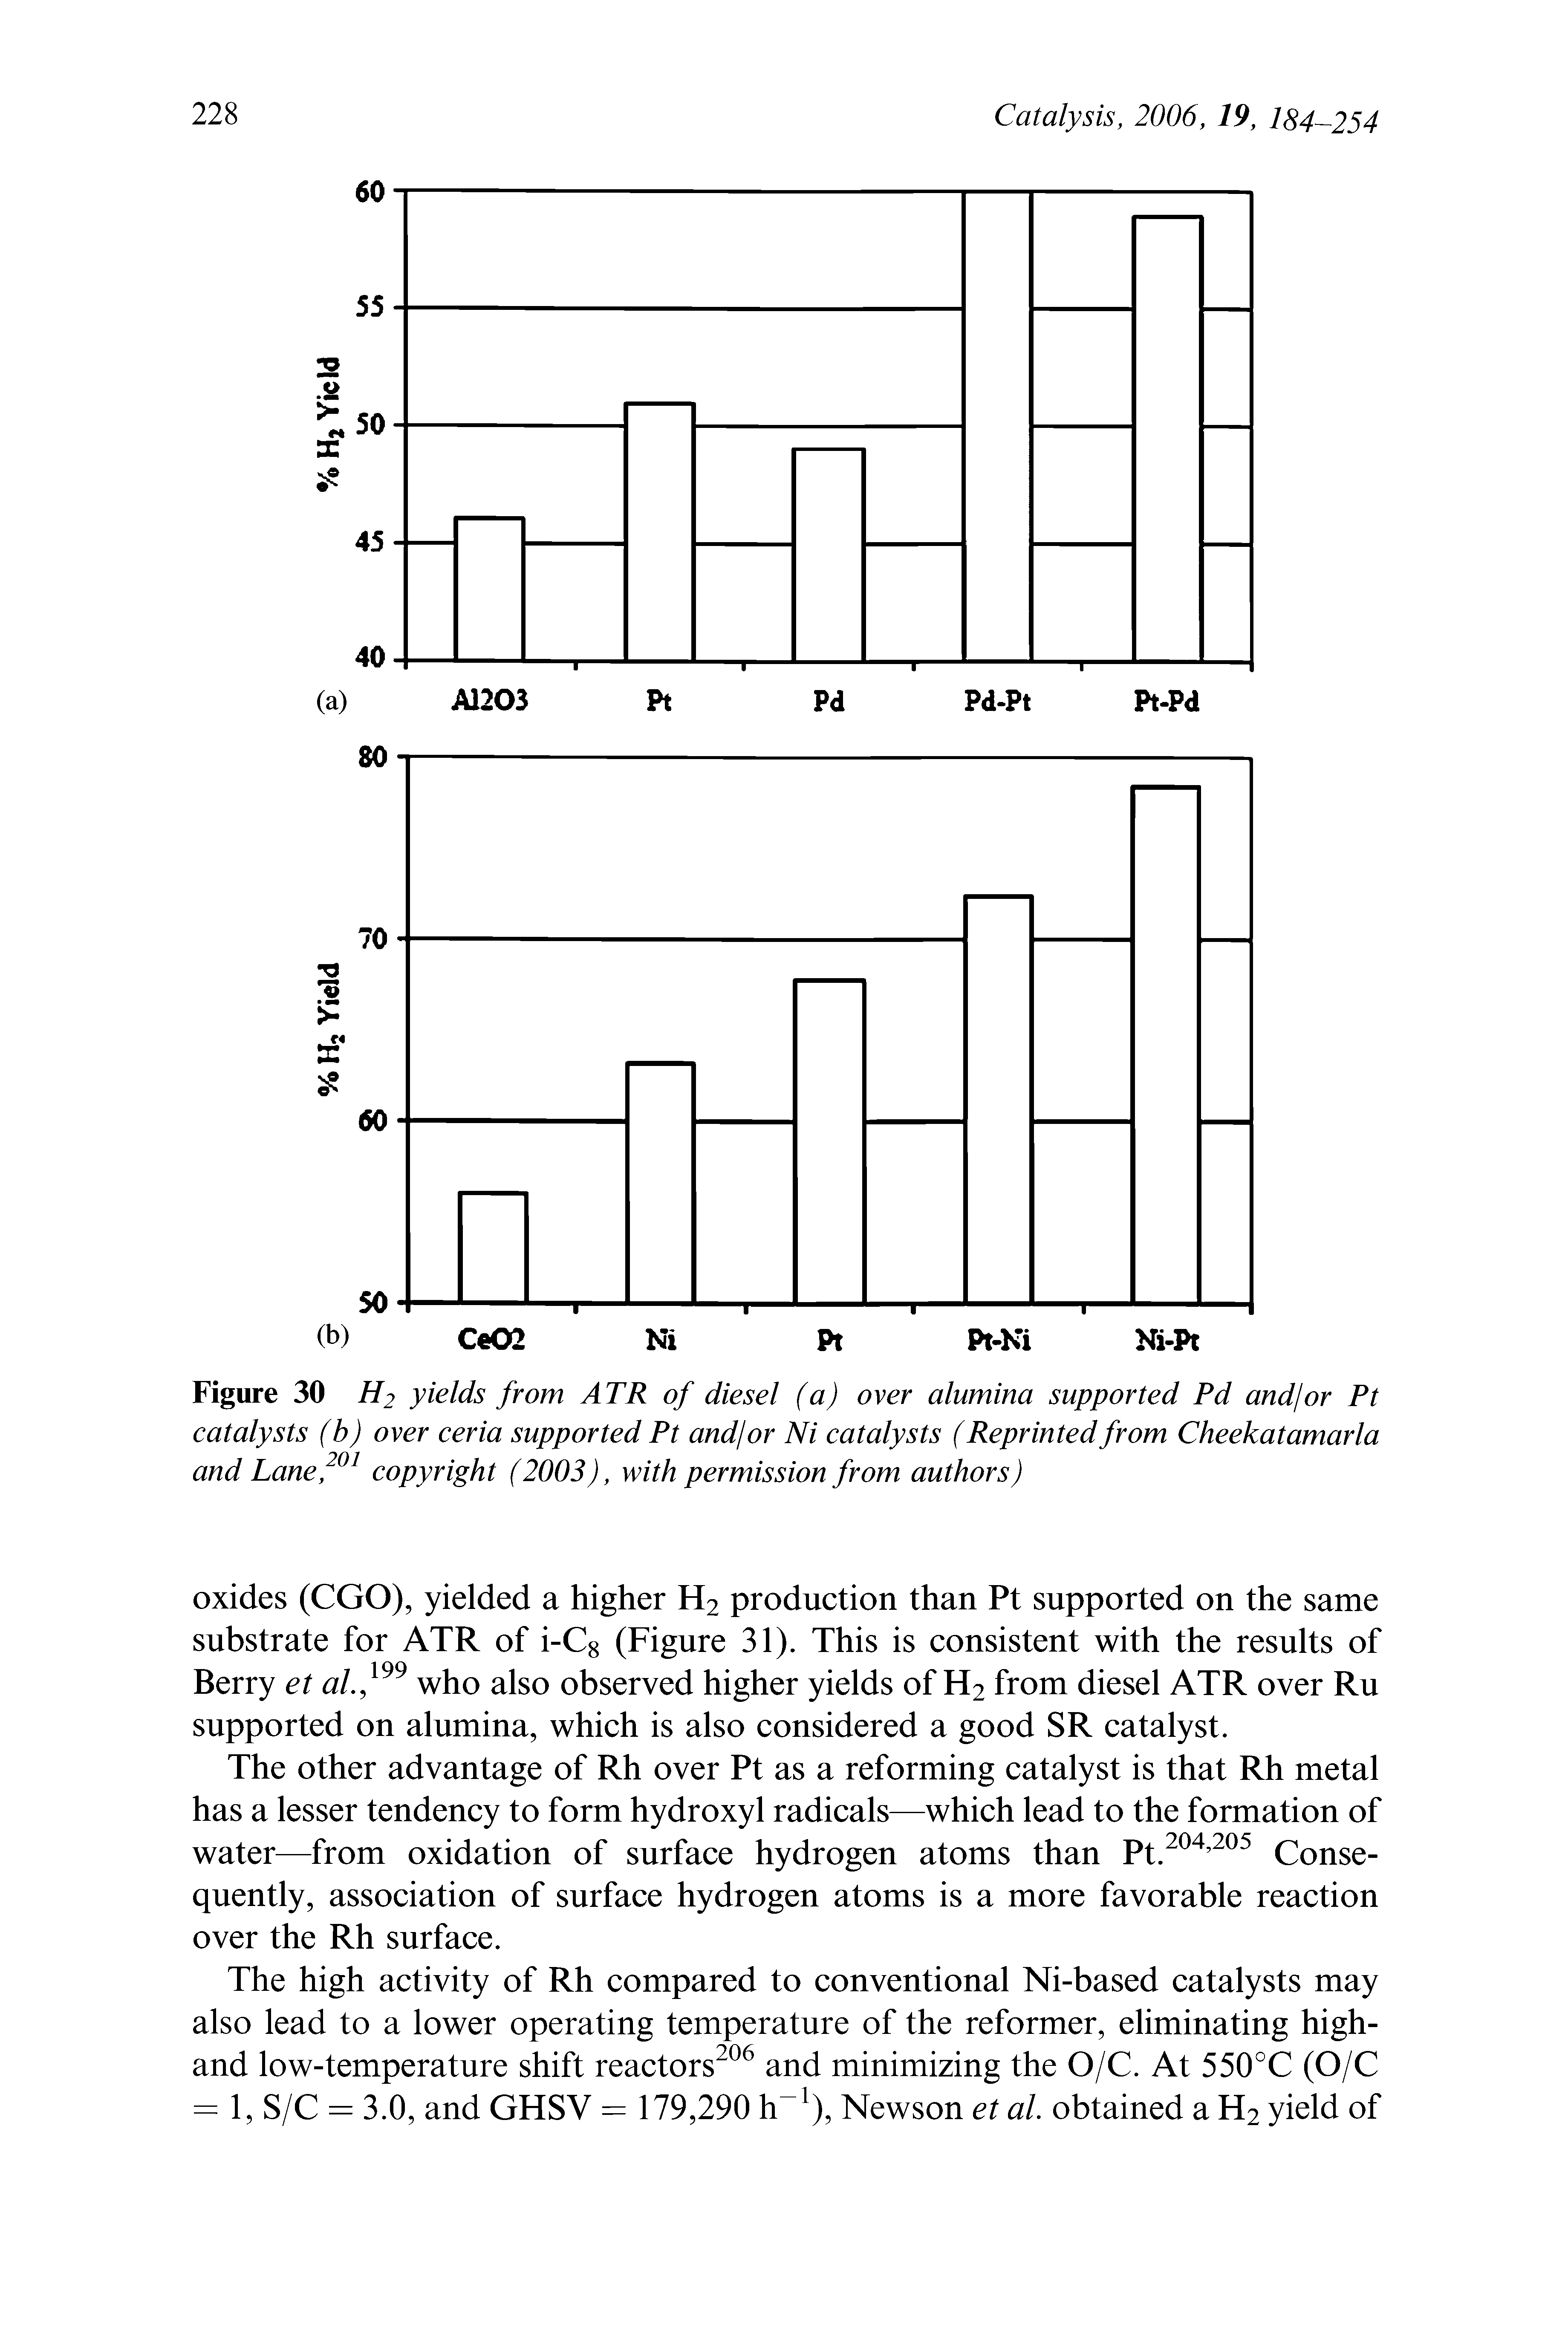 Figure 30 H2 yields from ATR of diesel (a) over alumina supported Pd and/or Pt catalysts (b) over ceria supported Pt and/or Ni catalysts (Reprinted from Cheekatamarla and Lane, copyright (2003), with permission from authors)...